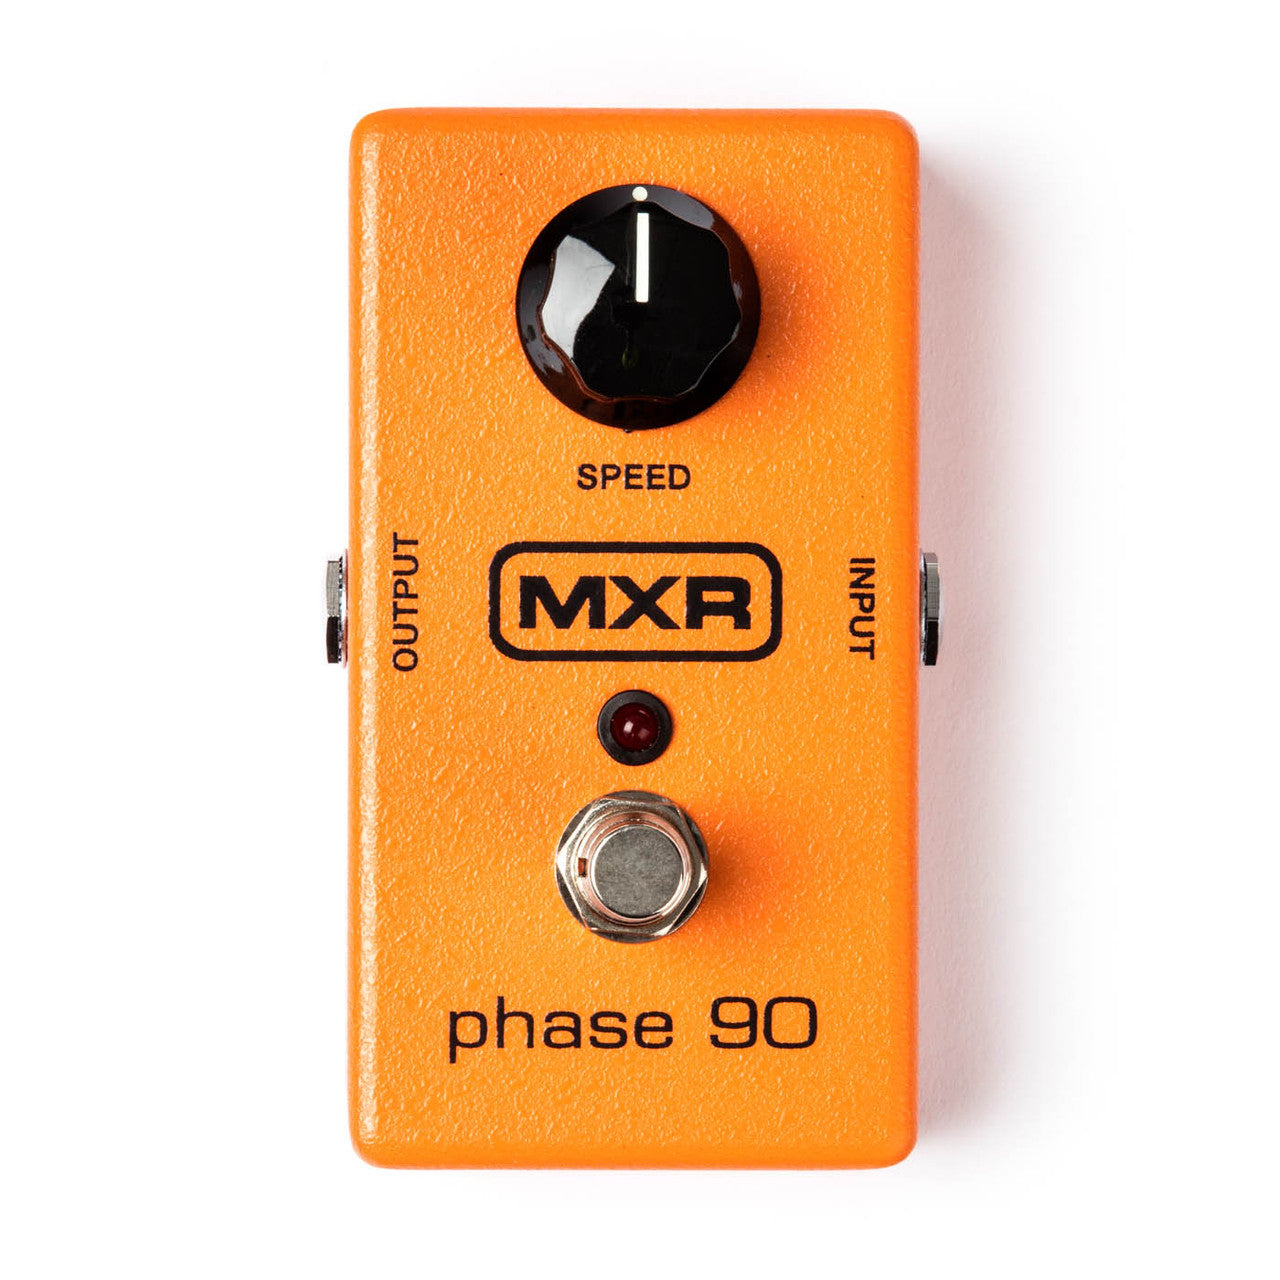 MXR Phase 90 Phase Effects Pedal For Guitar, Bass, & Keyboards